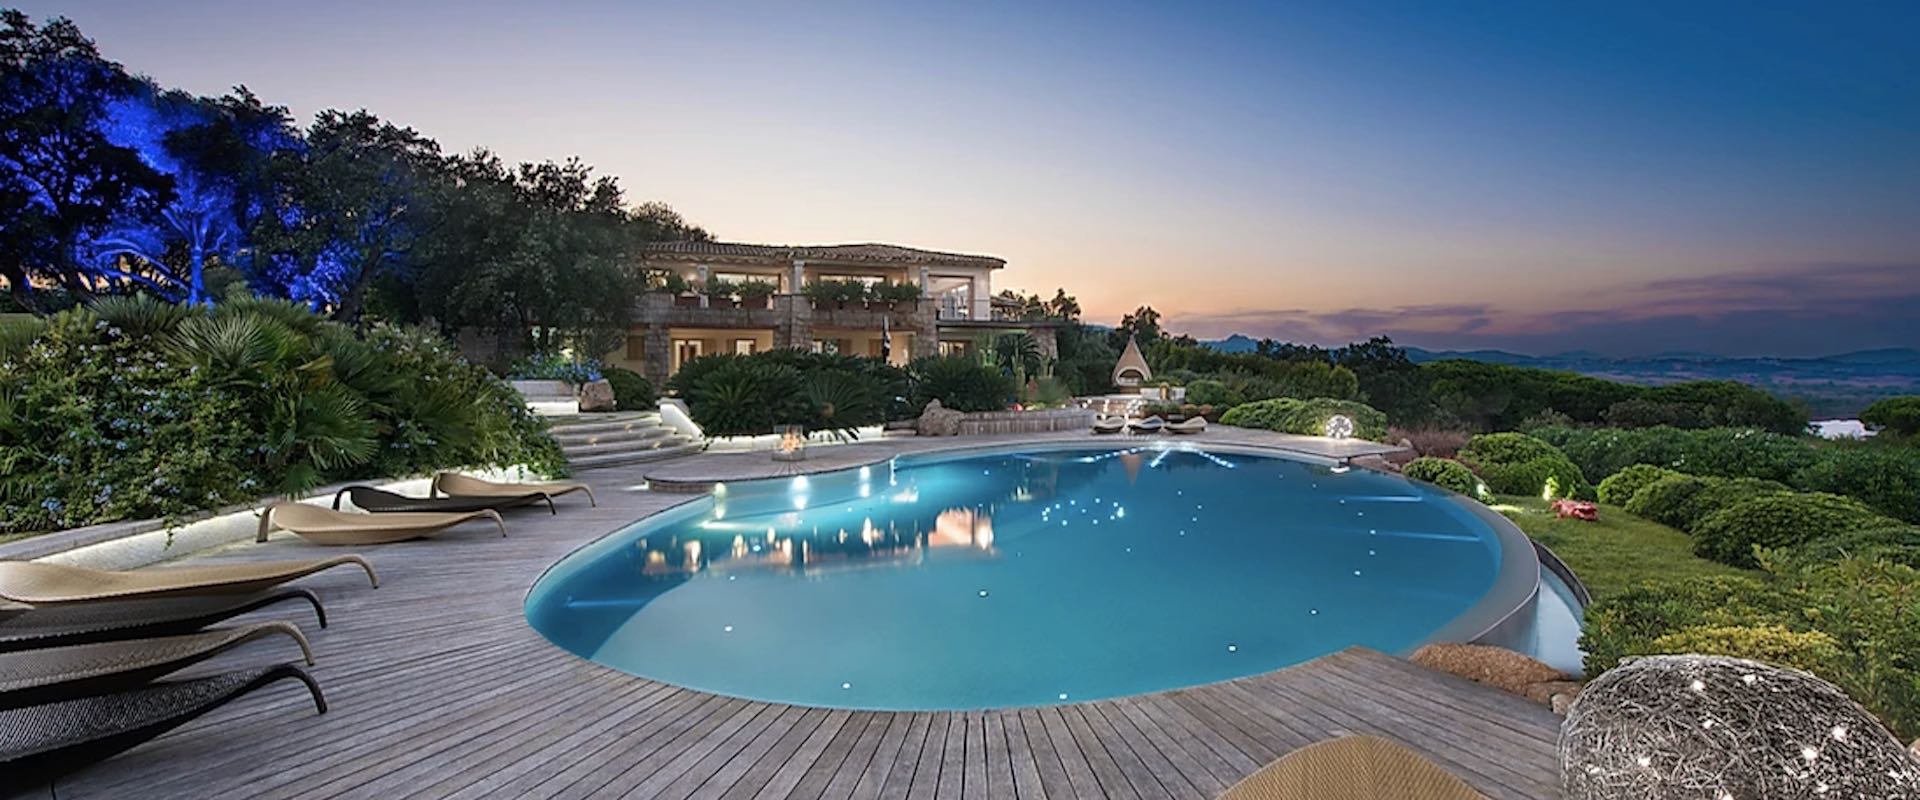 Villa Sea Breeze pool close-up with stunning view